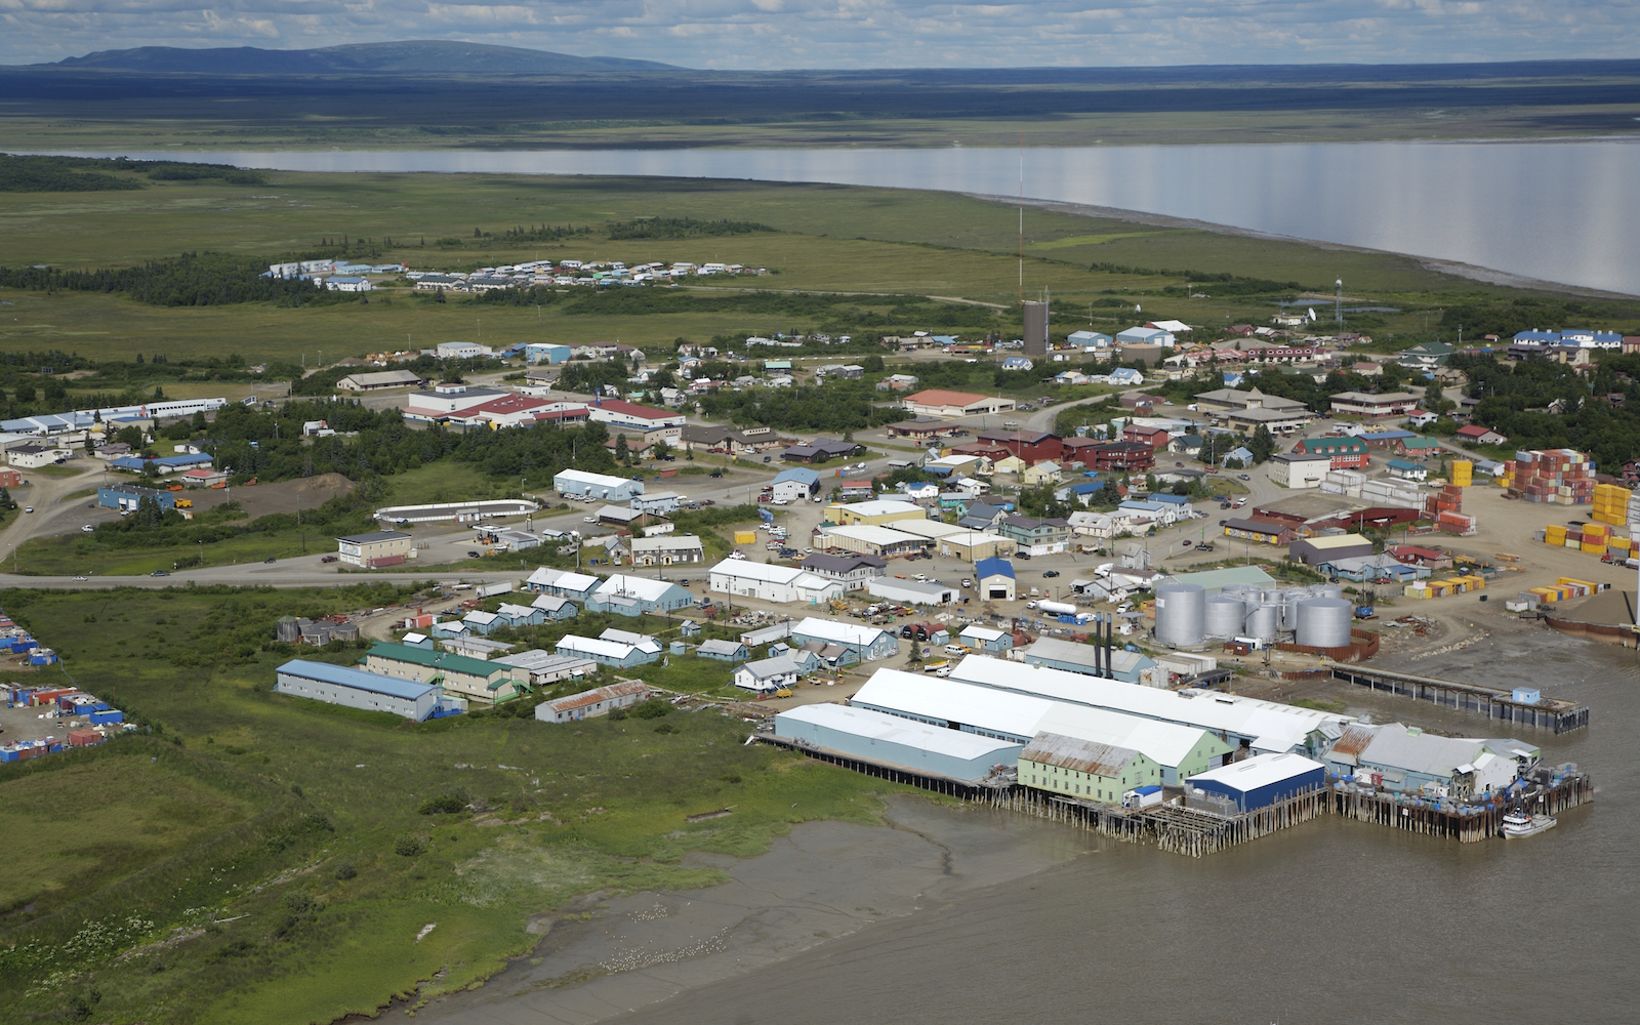 An aerial view of a small fishing town with many industrial buildings near the water, surrounded by the Bristol Bay with shoreline and mountains in the distance.